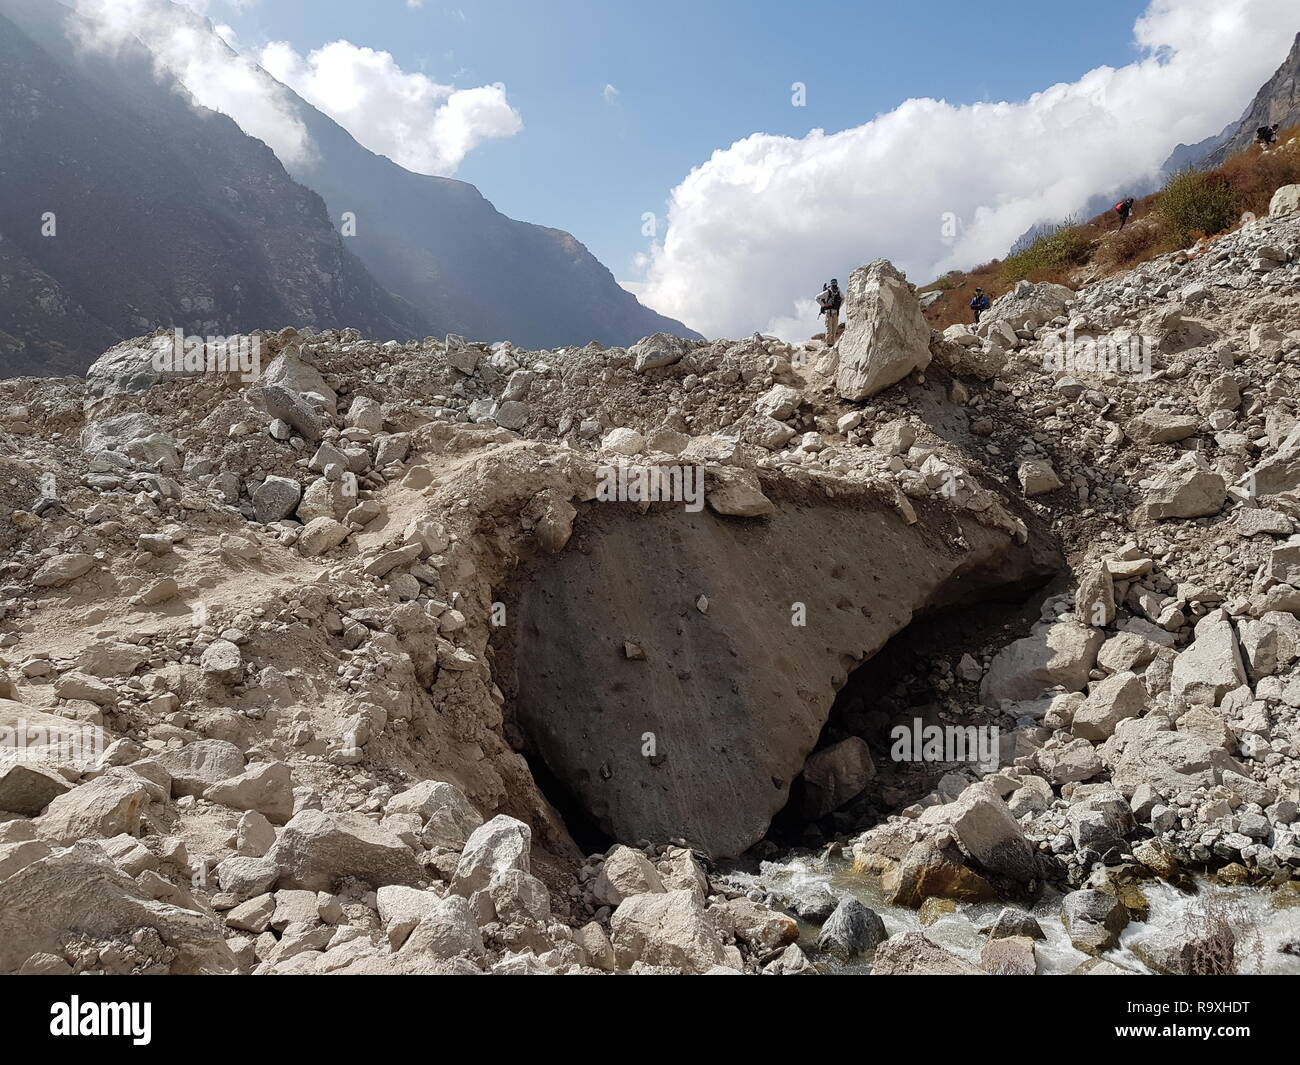 Huge amount of rubble at Langtang village,Nepal. It was caused by the earthquake in 2015. Over 200 people and diverse buildings lying under the rubbis Stock Photo